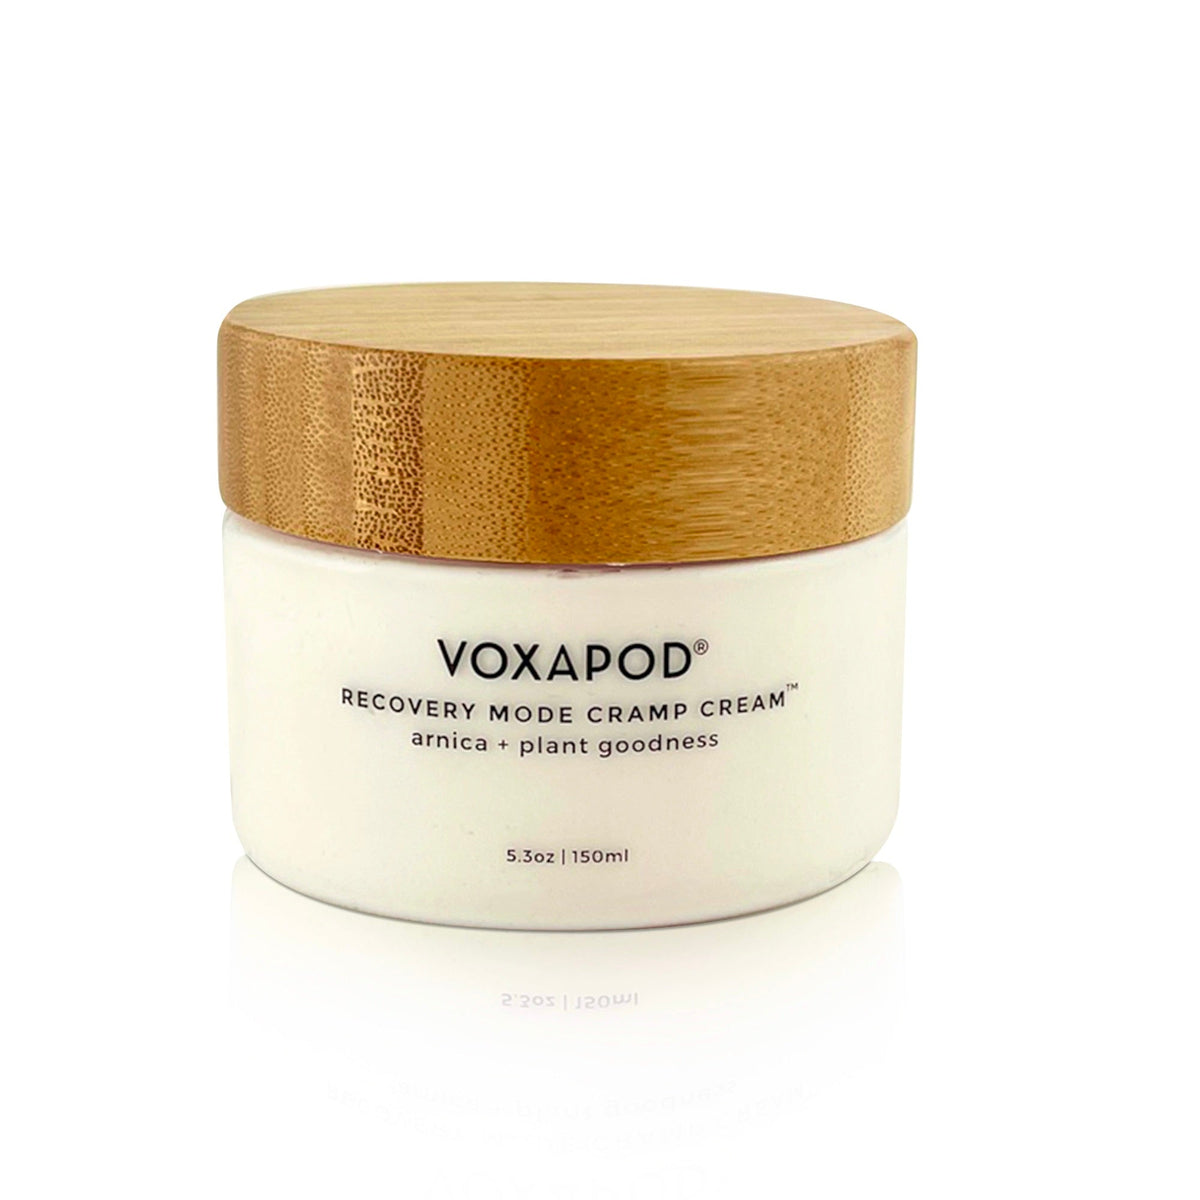 Recovery Mode Period Cramp Cream - VOXAPOD® soft reusable medical grade silicone fda approved period cup